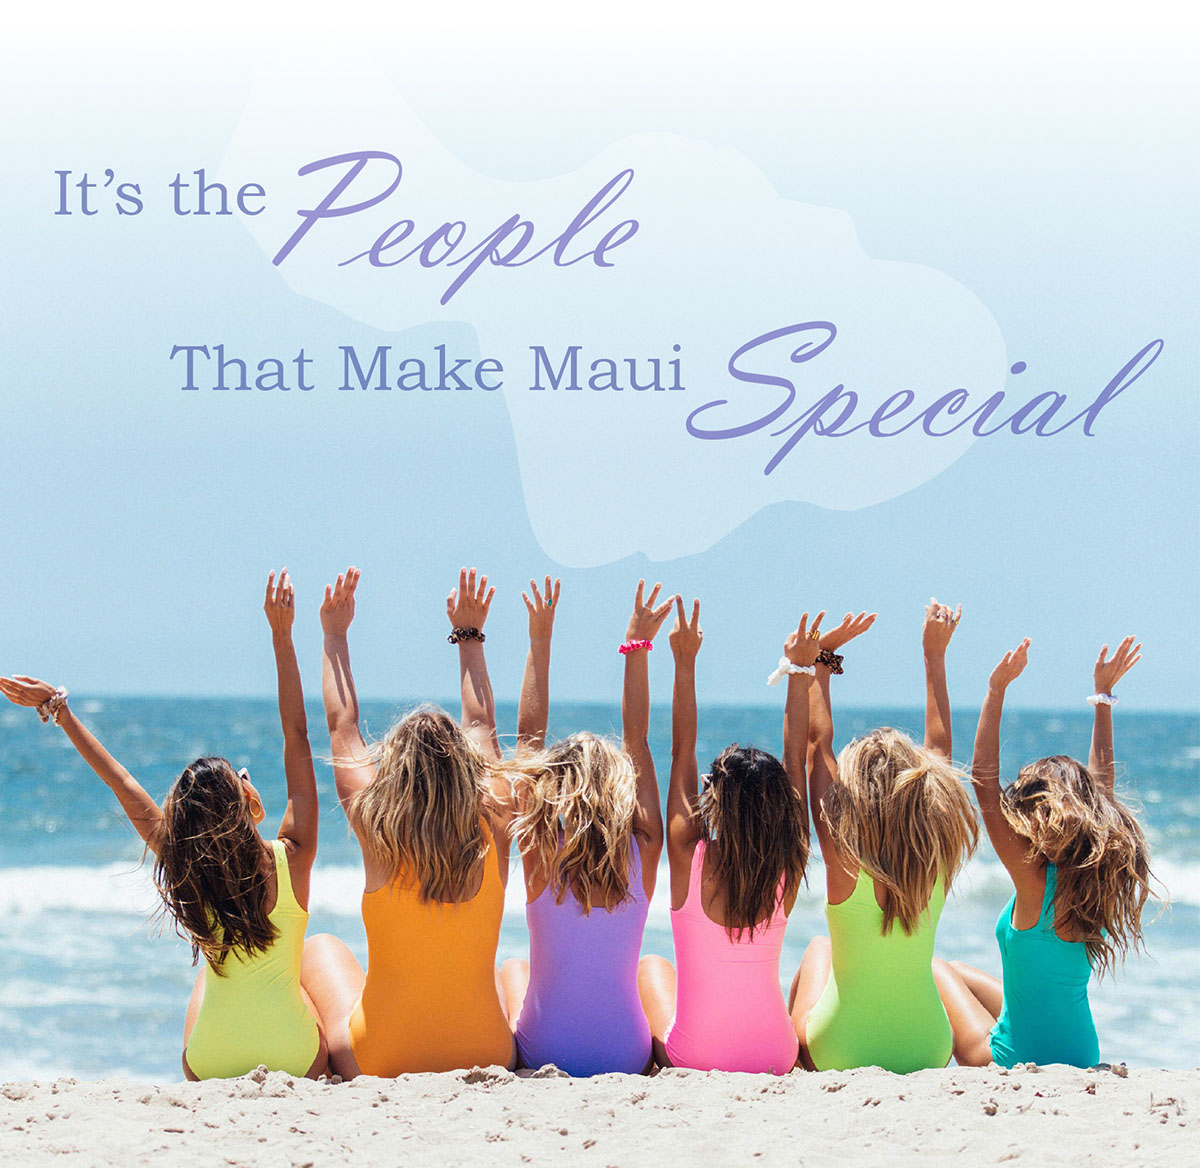 It's The People That Make Maui Special